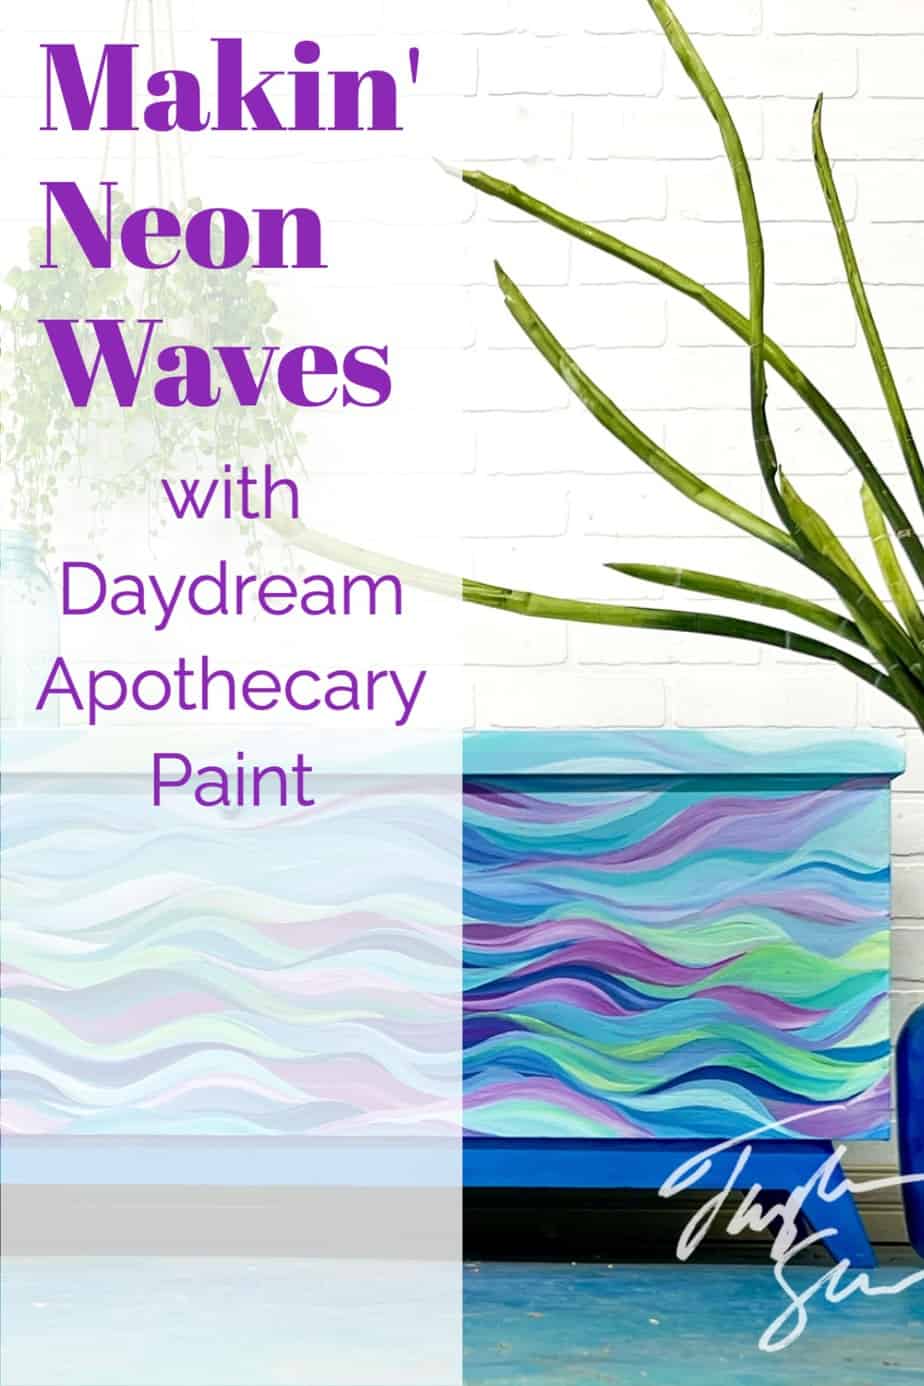 Making Neon Waves with Daydream Apothecary Paint